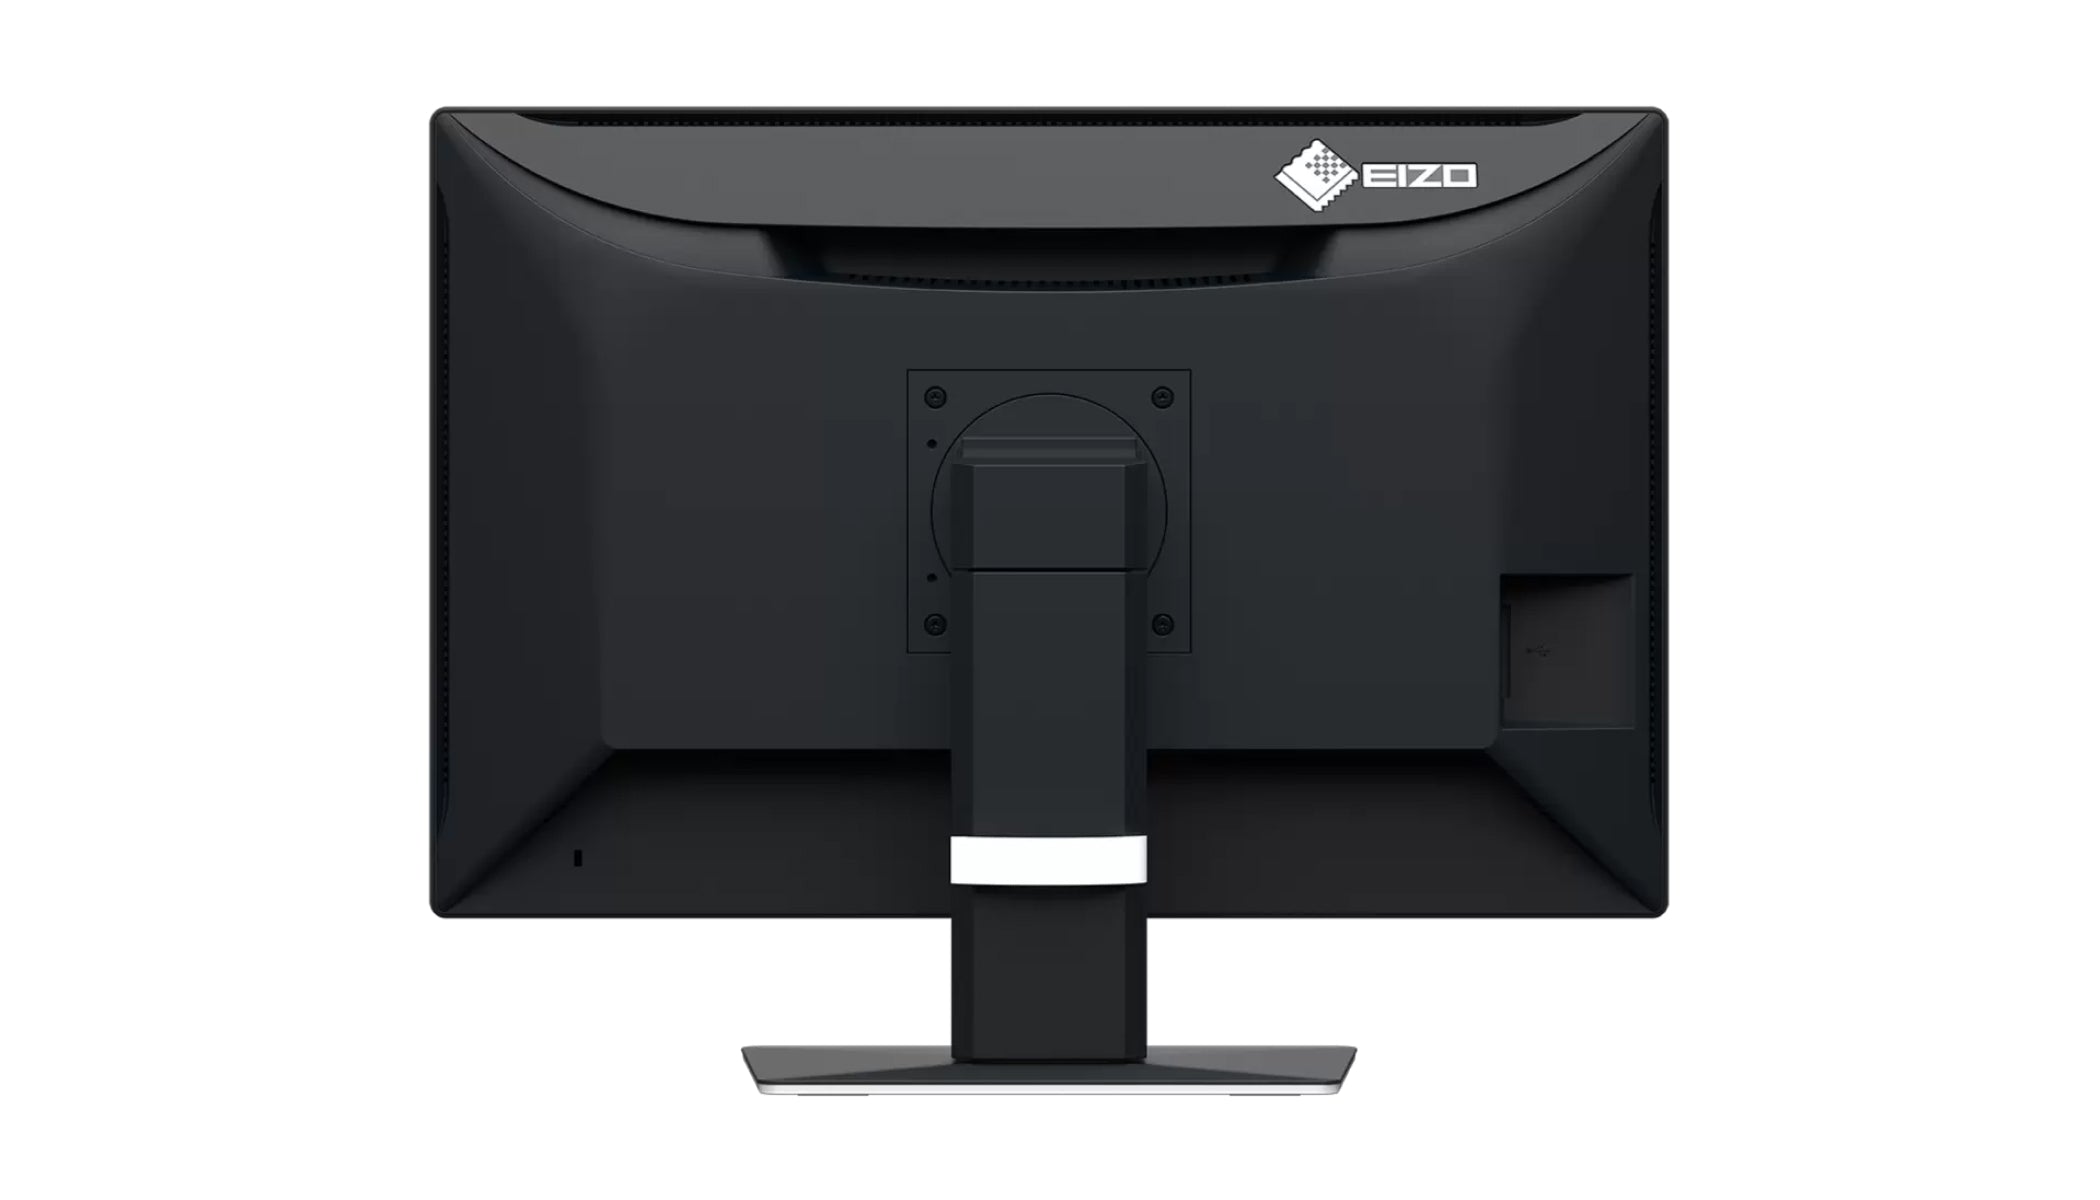 Eizo RadiForce MX243W 2.3MP 24" Color LED Clinical Review Display (MX243W)